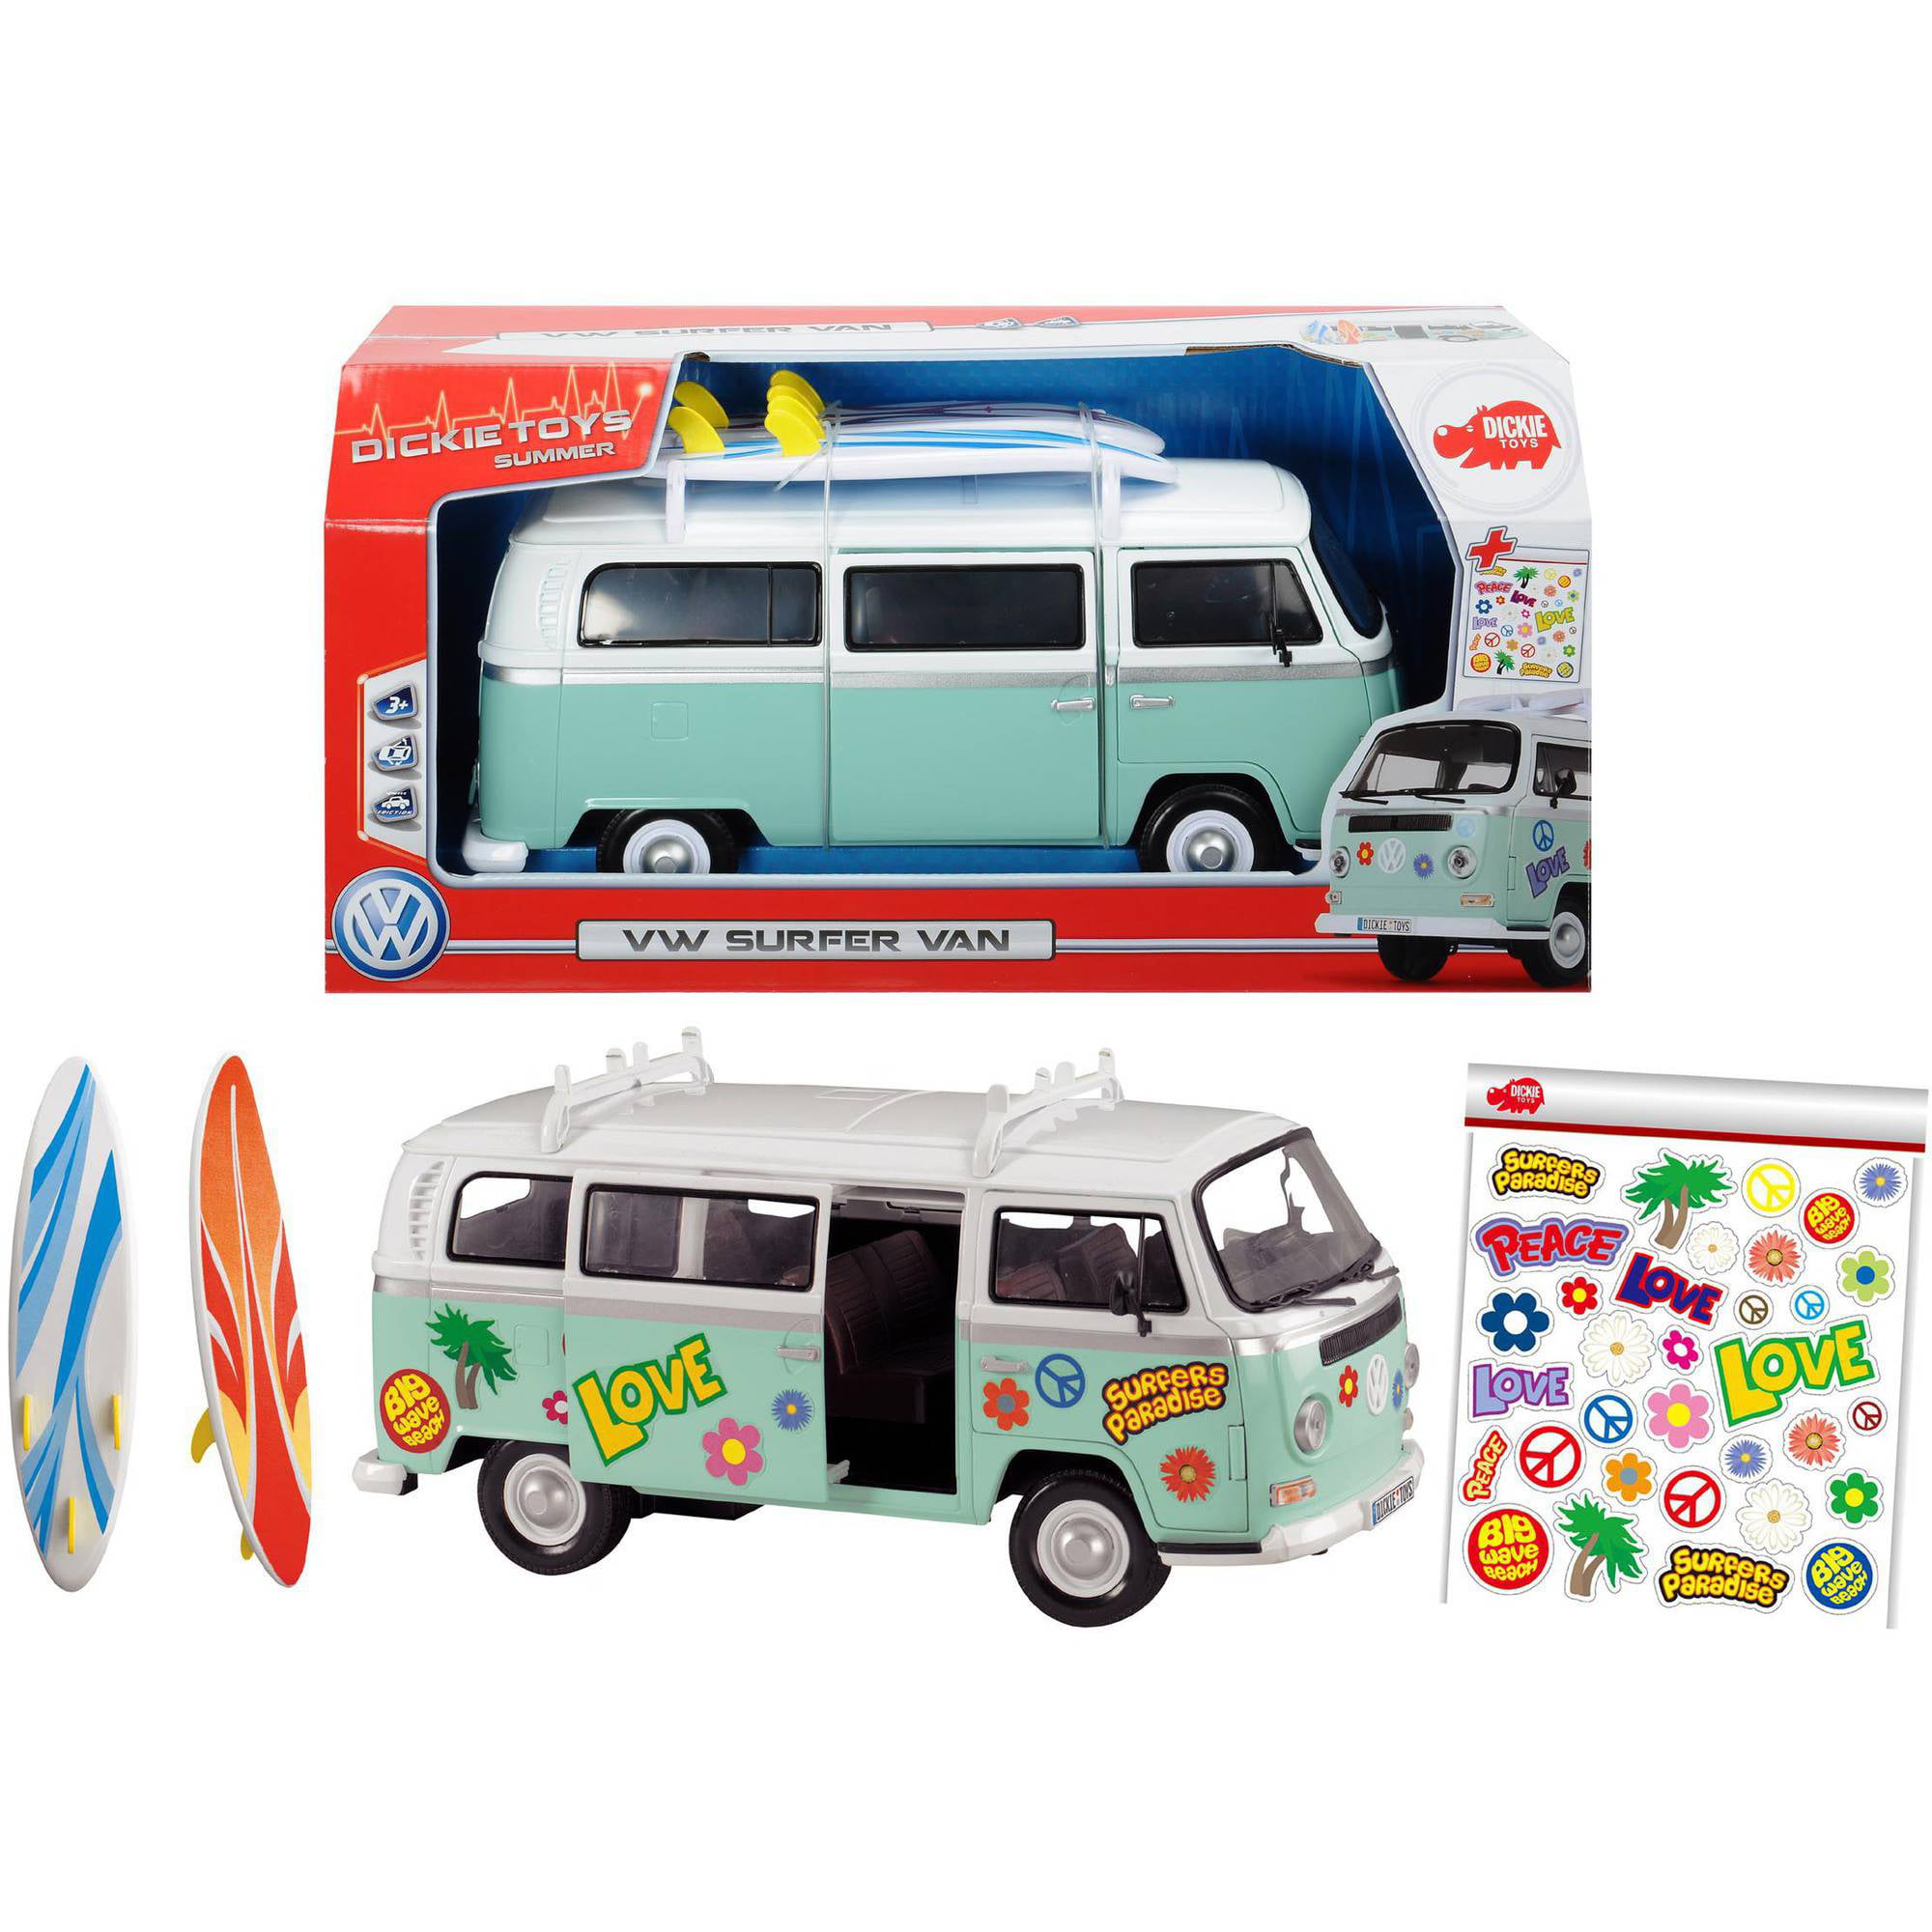 DICKIE TOYS 203776001 Retro VW Surfer Camper Van with Friction Drive 32  Centimetre Scale 1:14